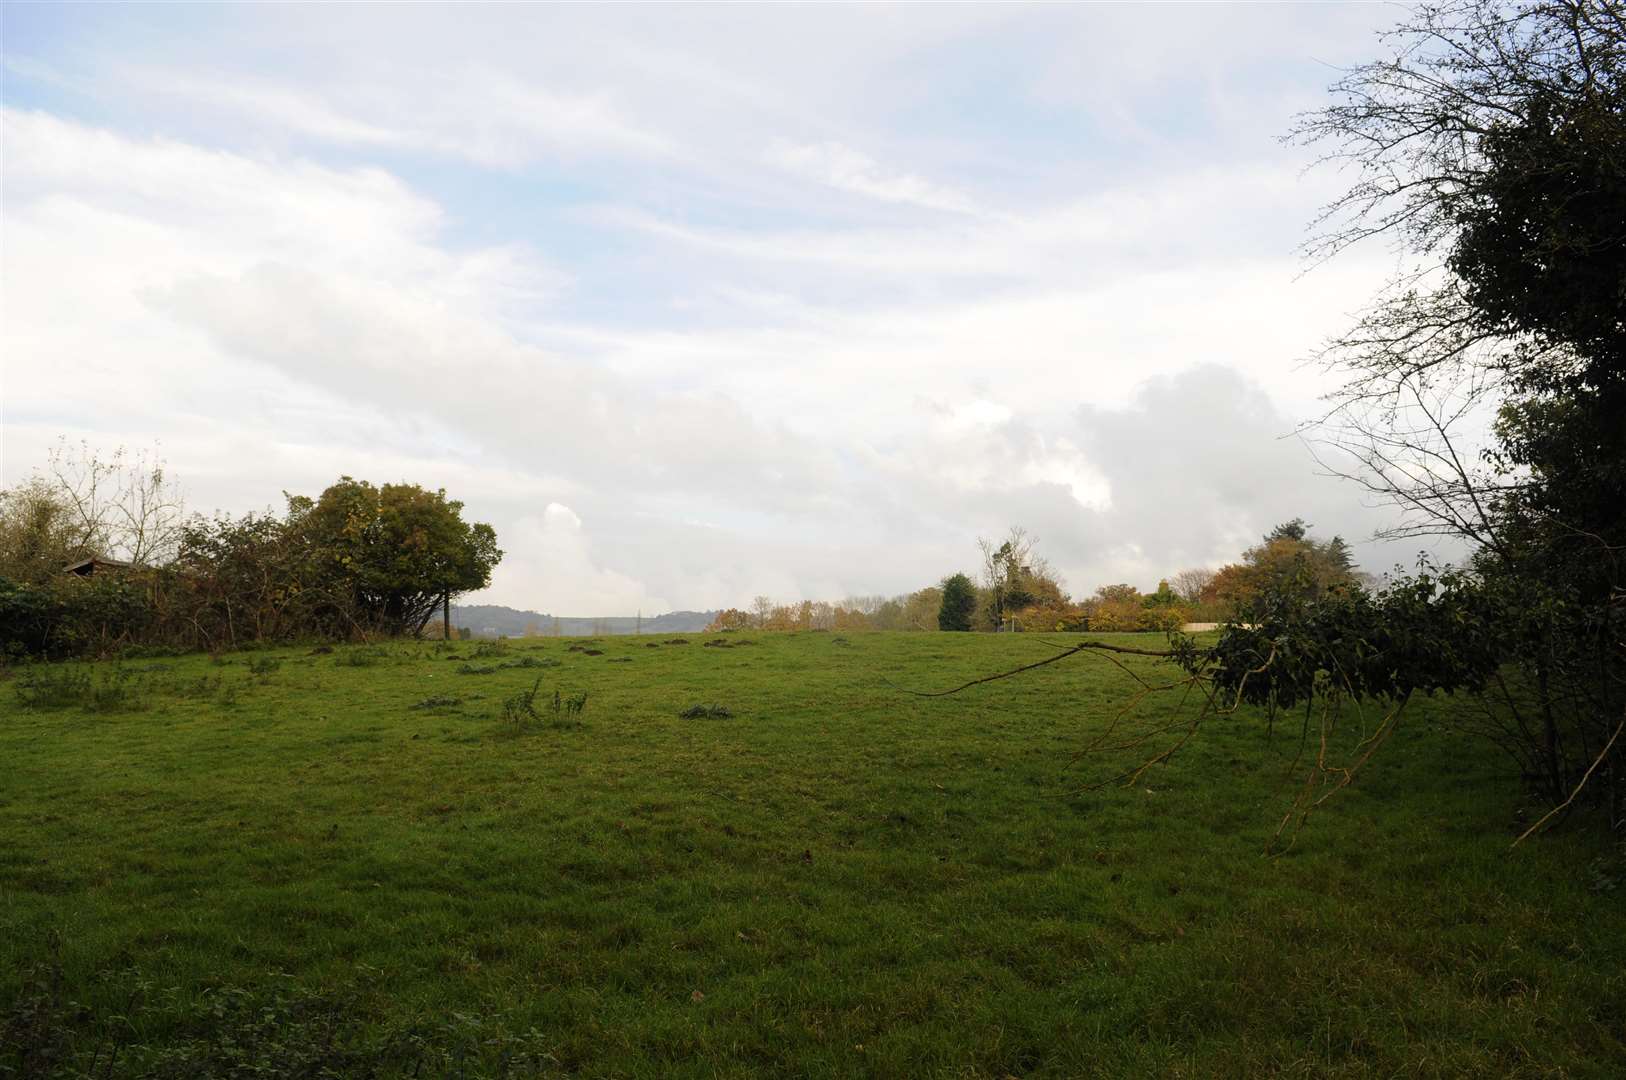 The area for development at Barty Farm. A large expanse of open land bordered by Roundwell, Water Lane and the railway line